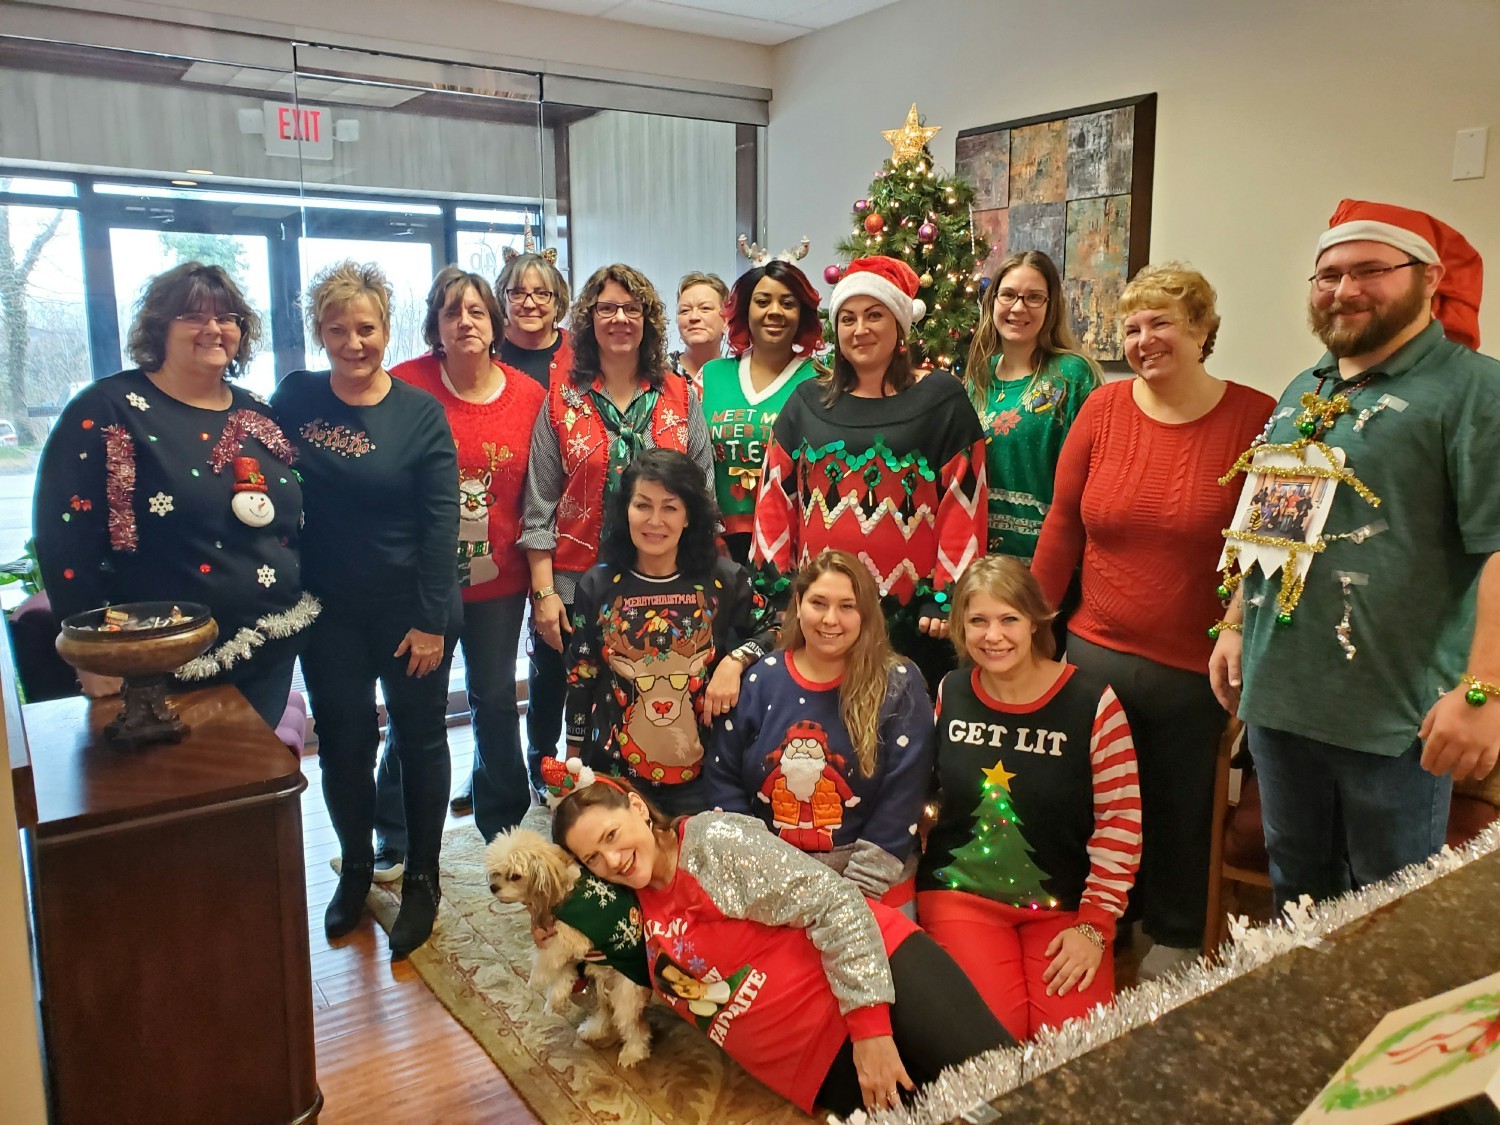 Ugly Sweater Party for Christmas